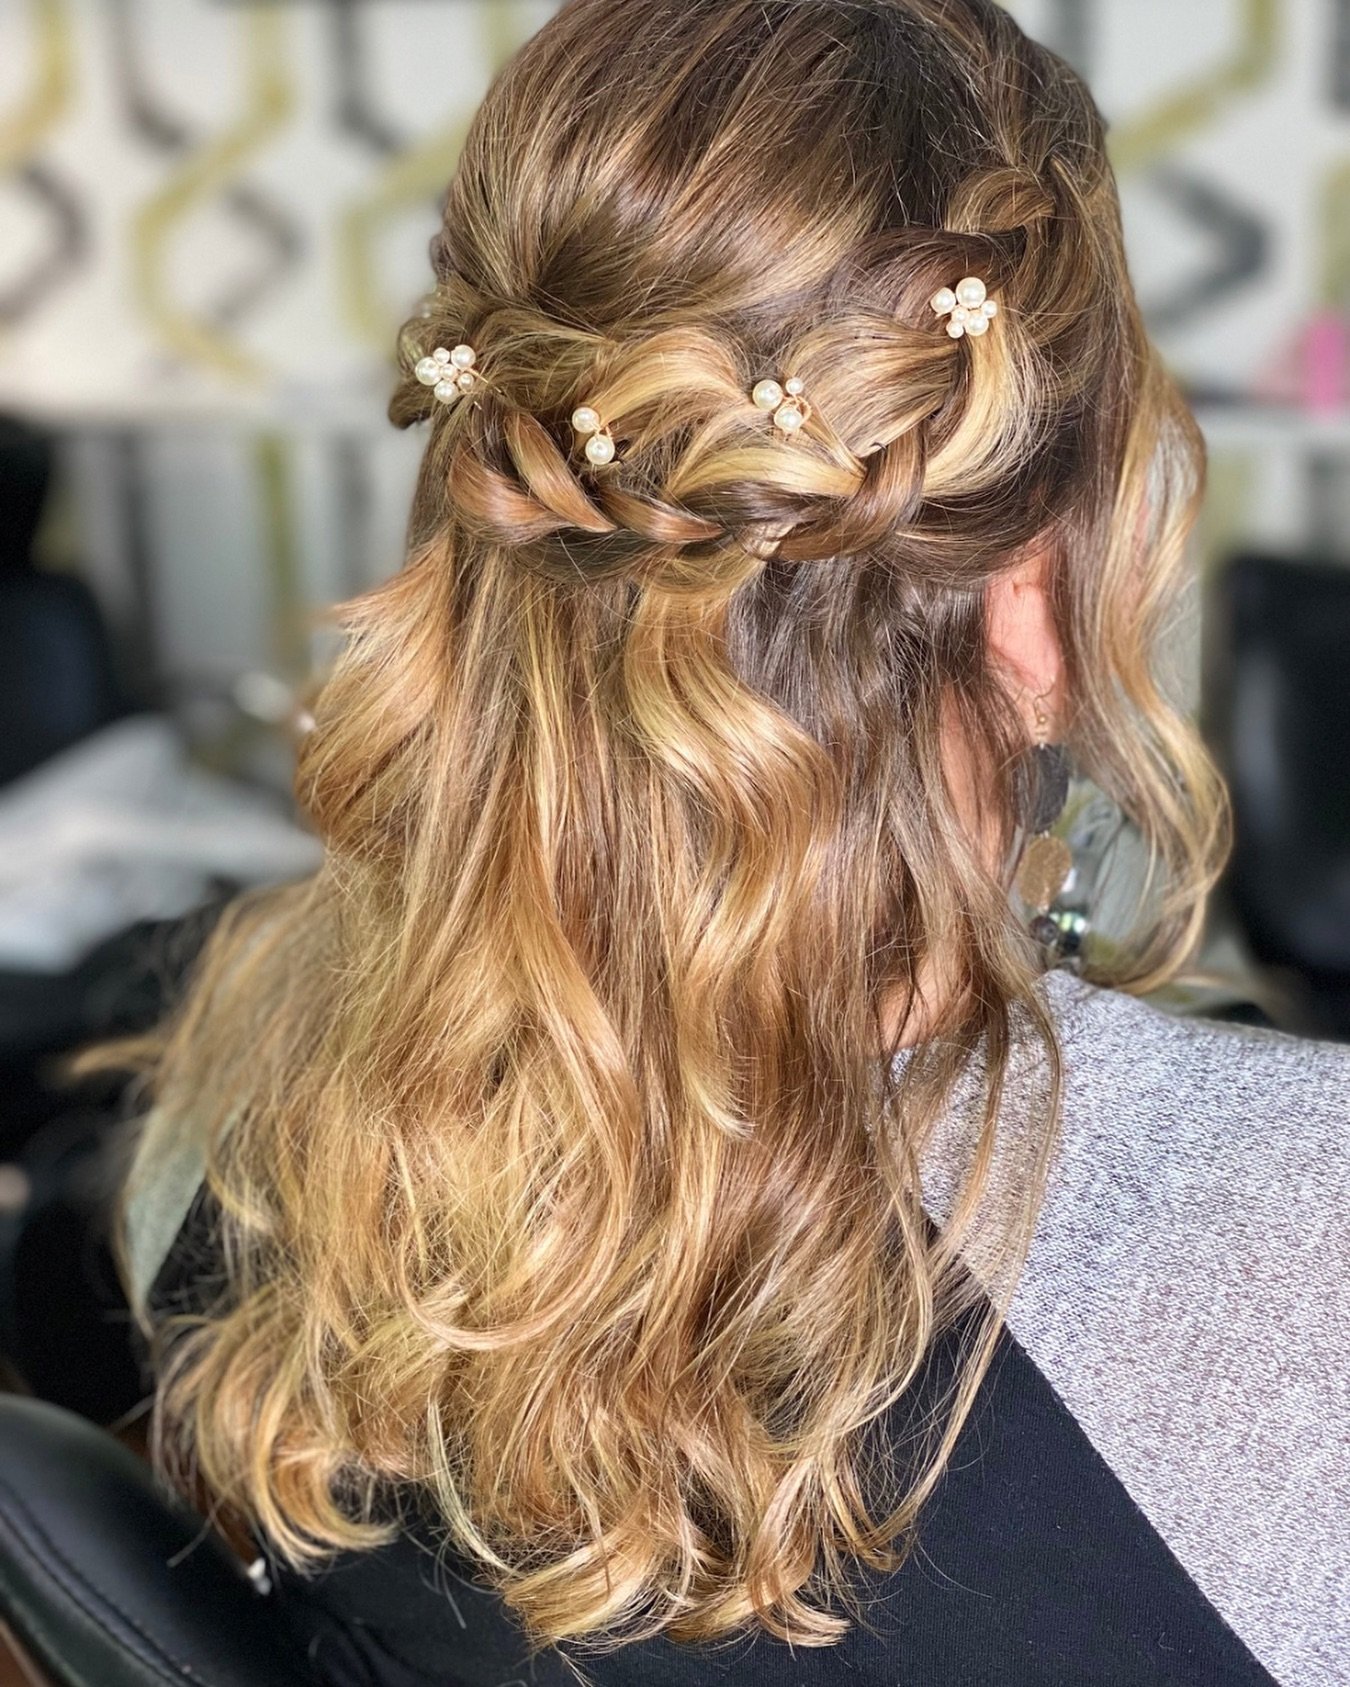 Are you a bride-to-be with a vision of an updo or partial upstyle for your big day? 🎉👰 Let me tell you why a Balayage service is an absolute match made in heaven for your stunning bridal hairstyle! 

😍✨ Get ready to turn heads and rock that confid